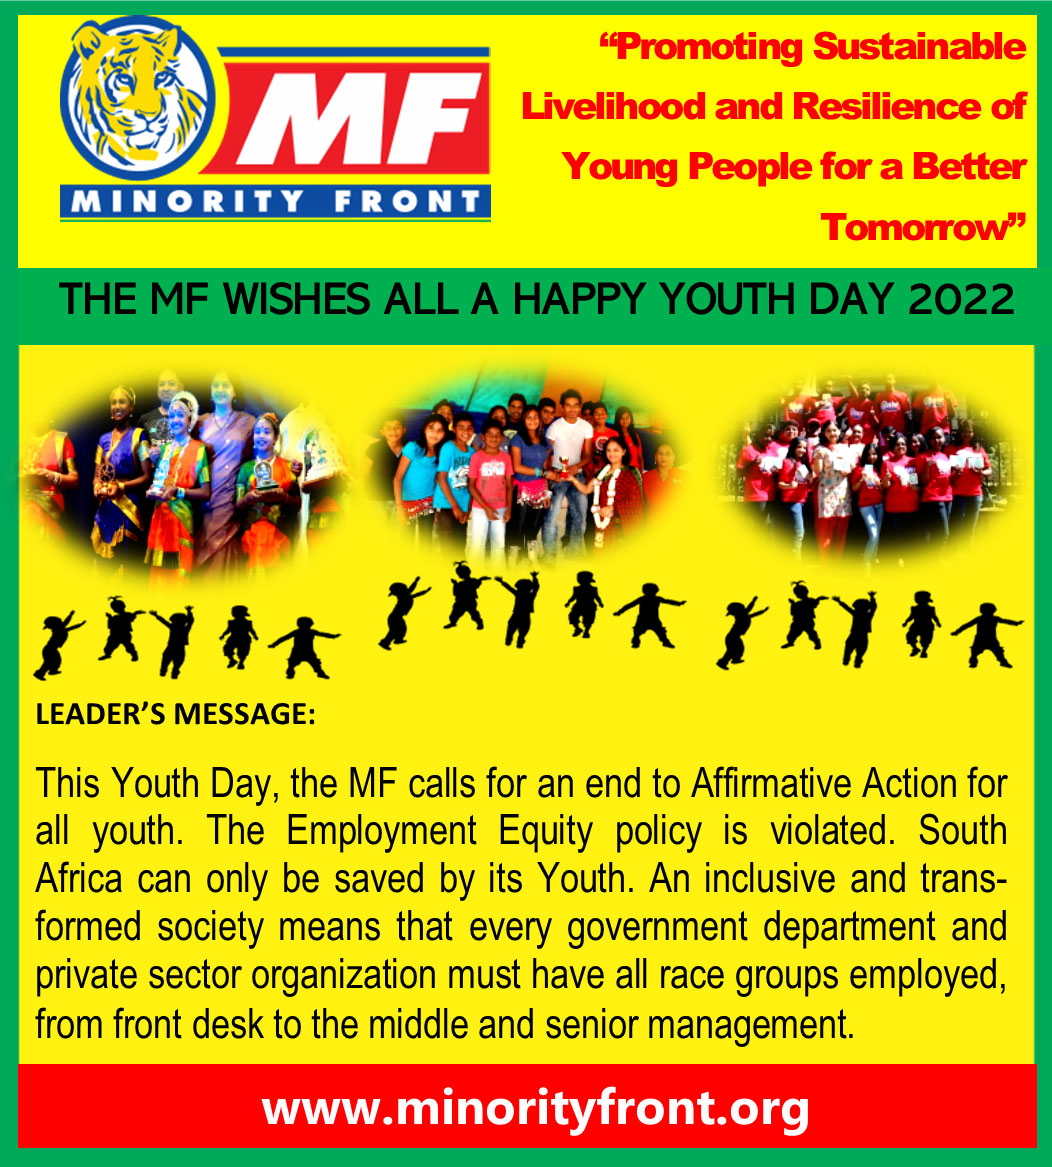 The MF Wishes All a Happy Youth Day 2022